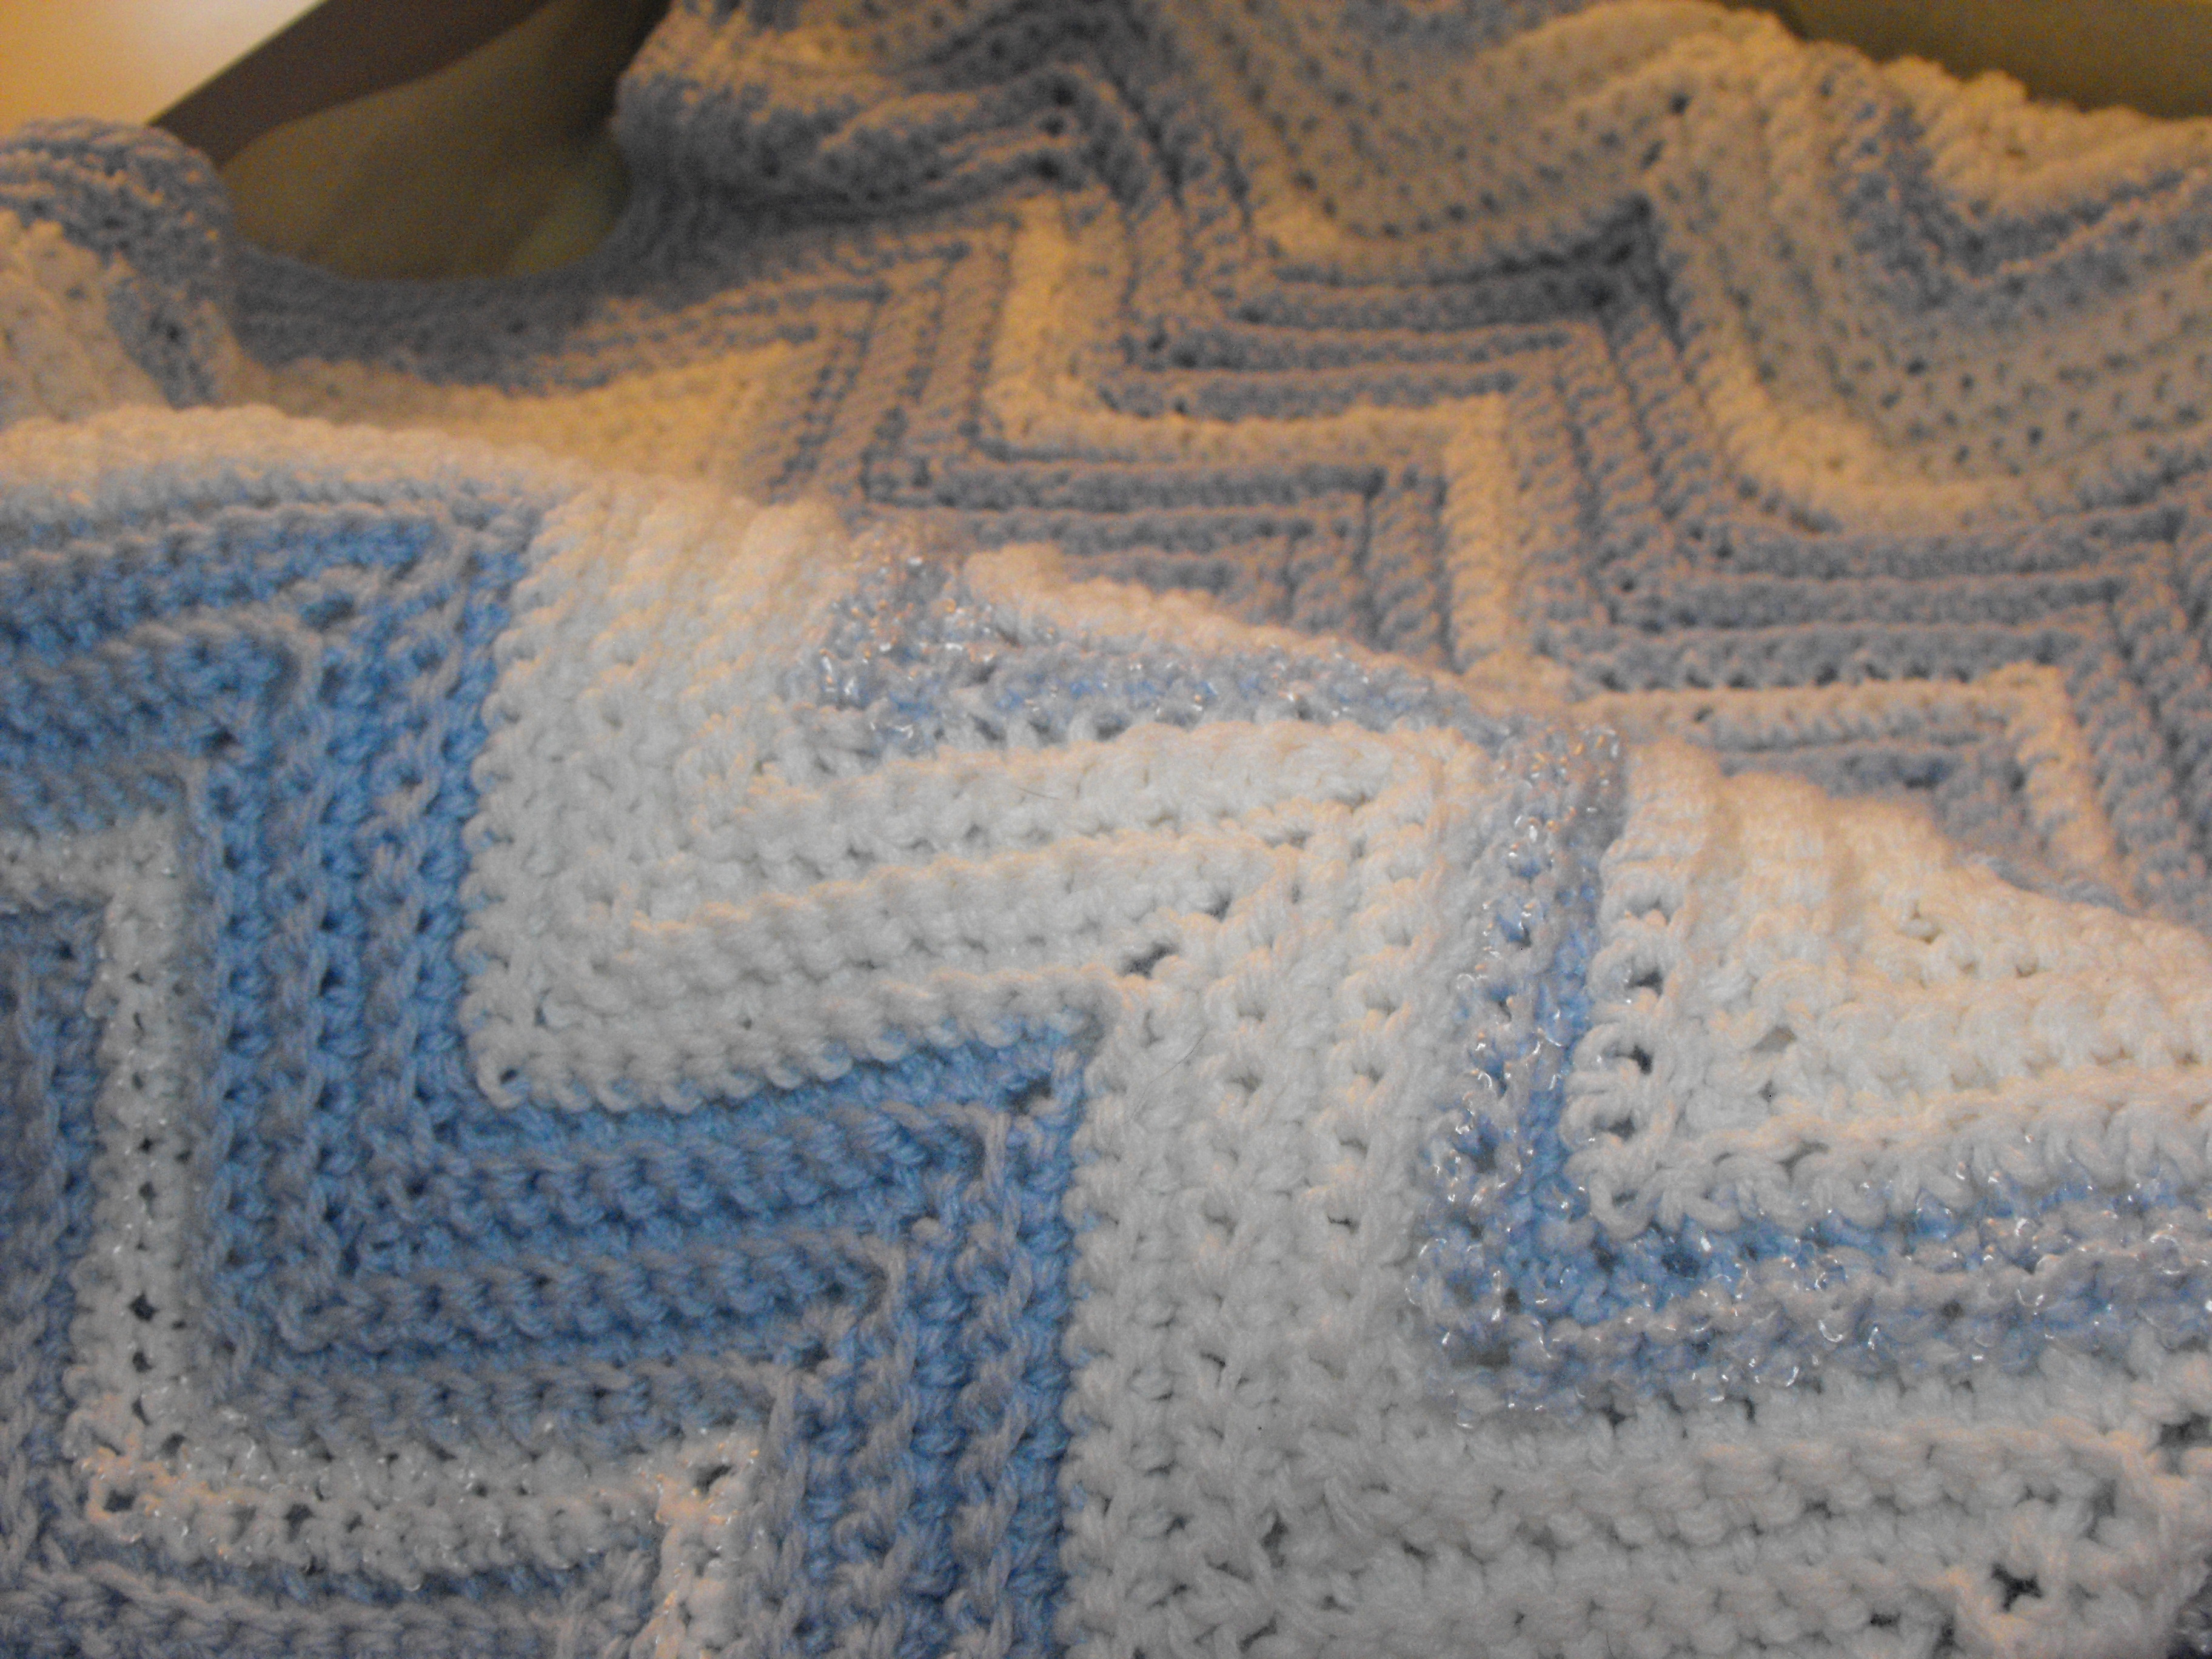 Blue & White Baby Blanket 40 x 50 $60.00 - close up of pattern